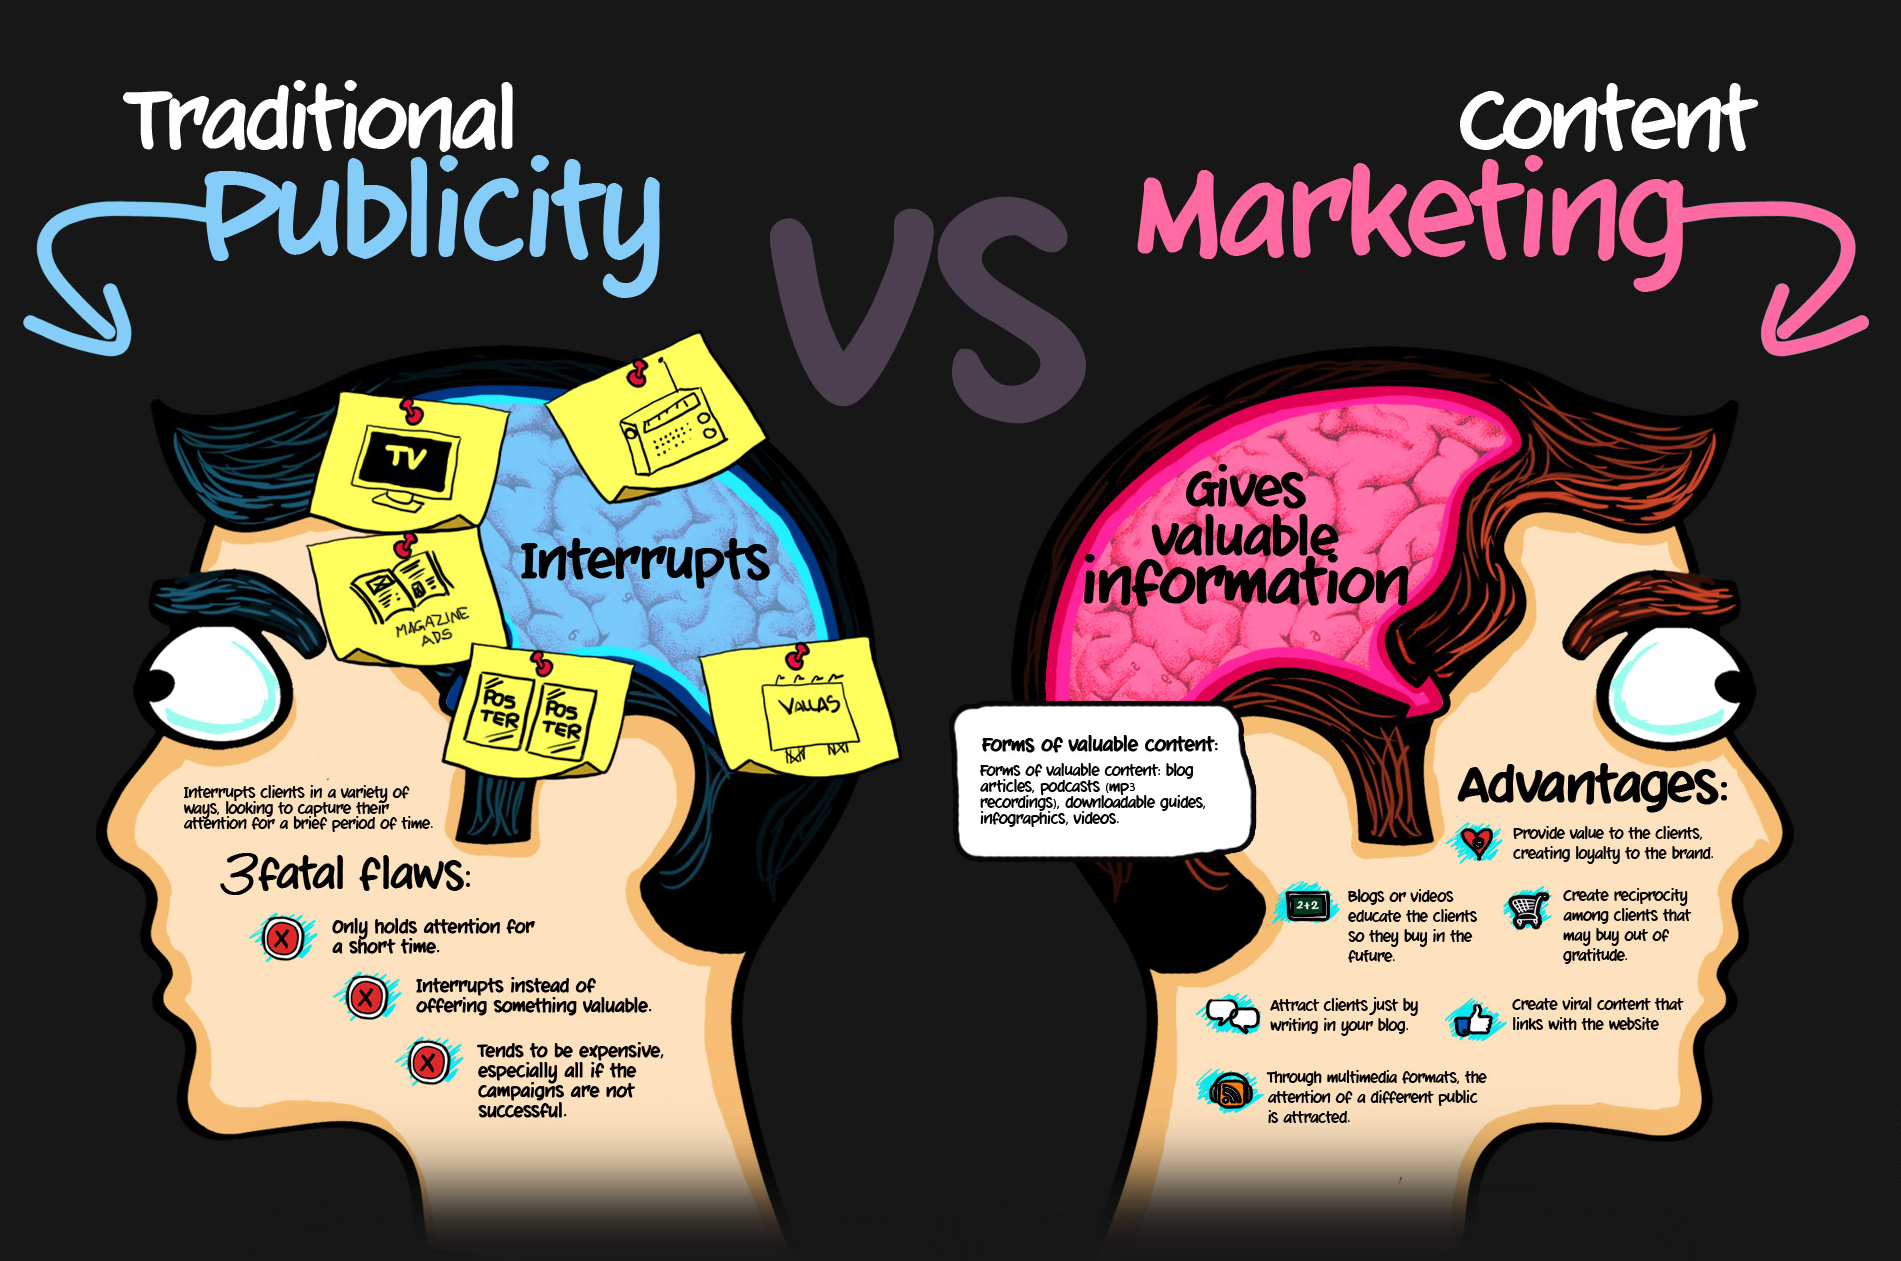 The Basic Idea behind Content Marketing